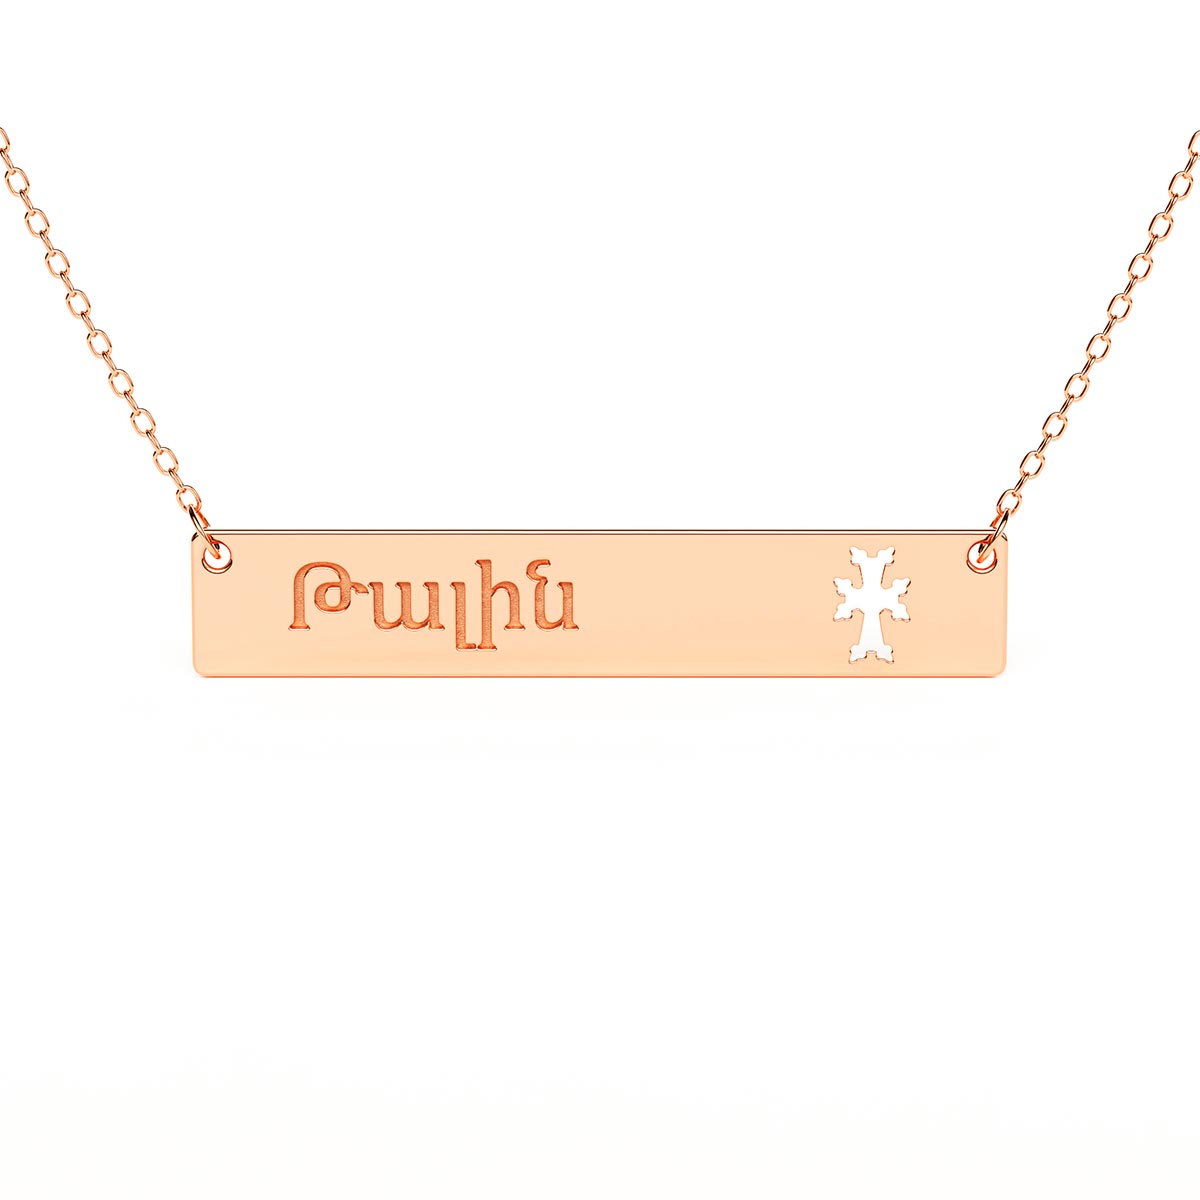 Cross Cutout Bar Necklace With Armenian Engraving